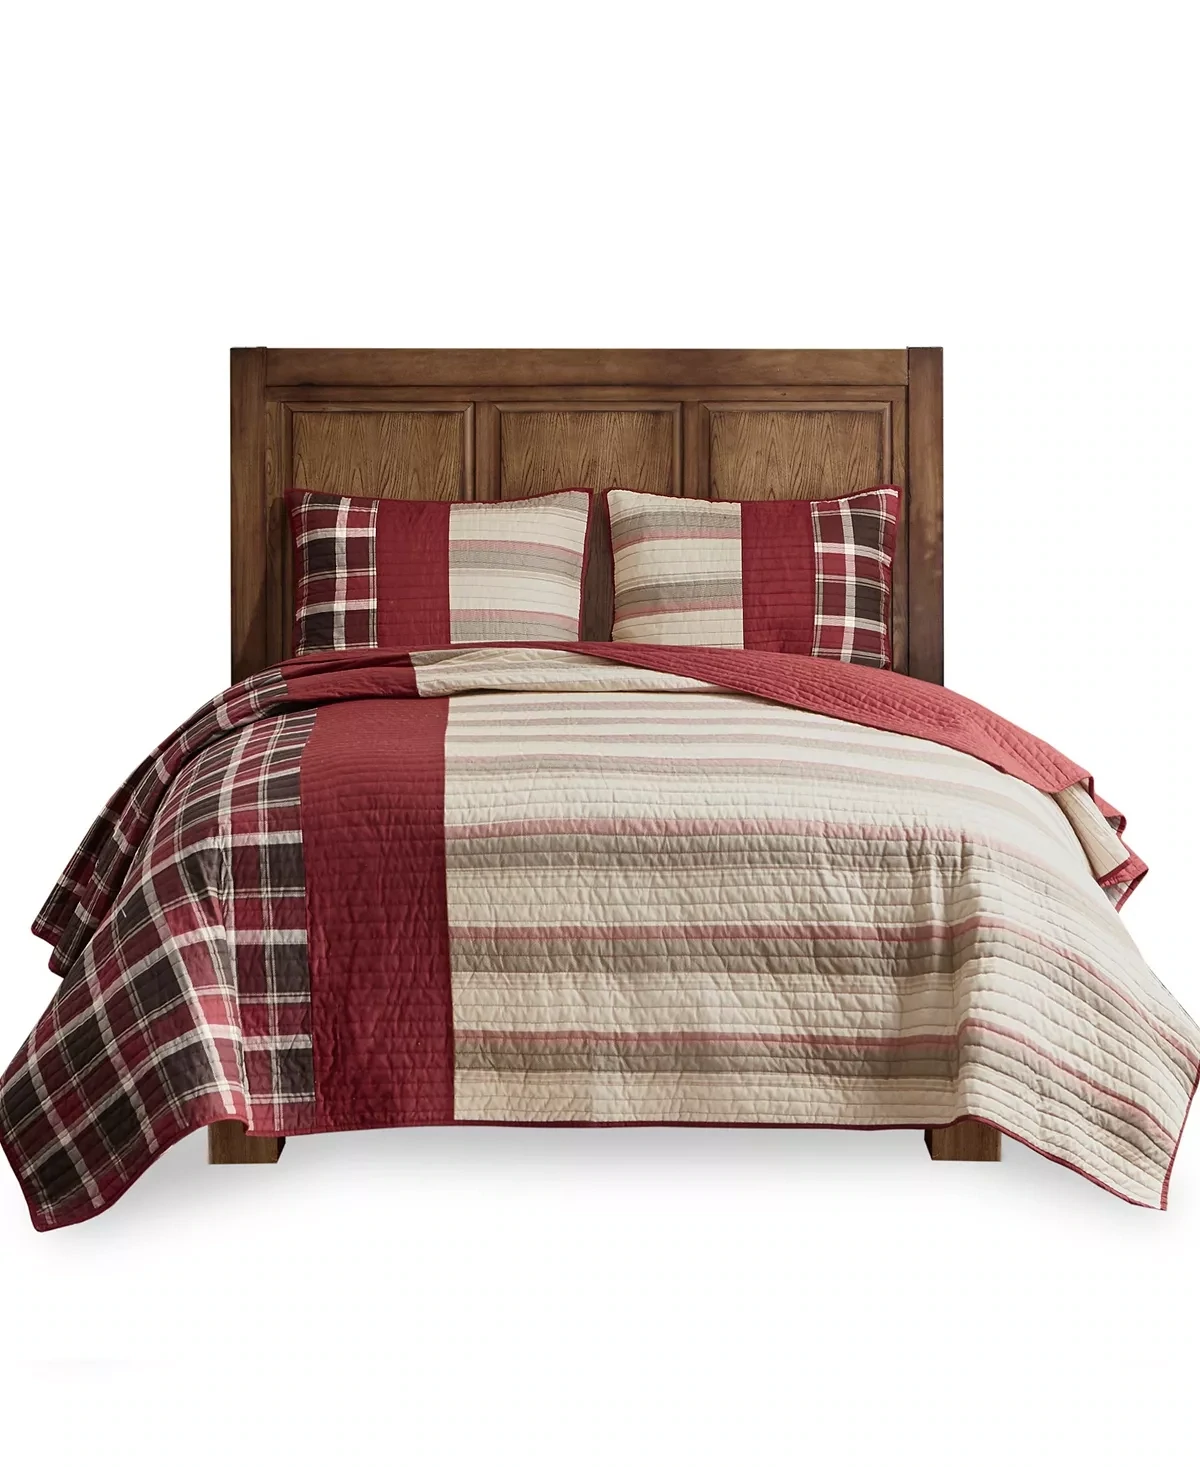 Woolrich Mill Valley 3-Pc. Quilt Set, Full/Queen - Red